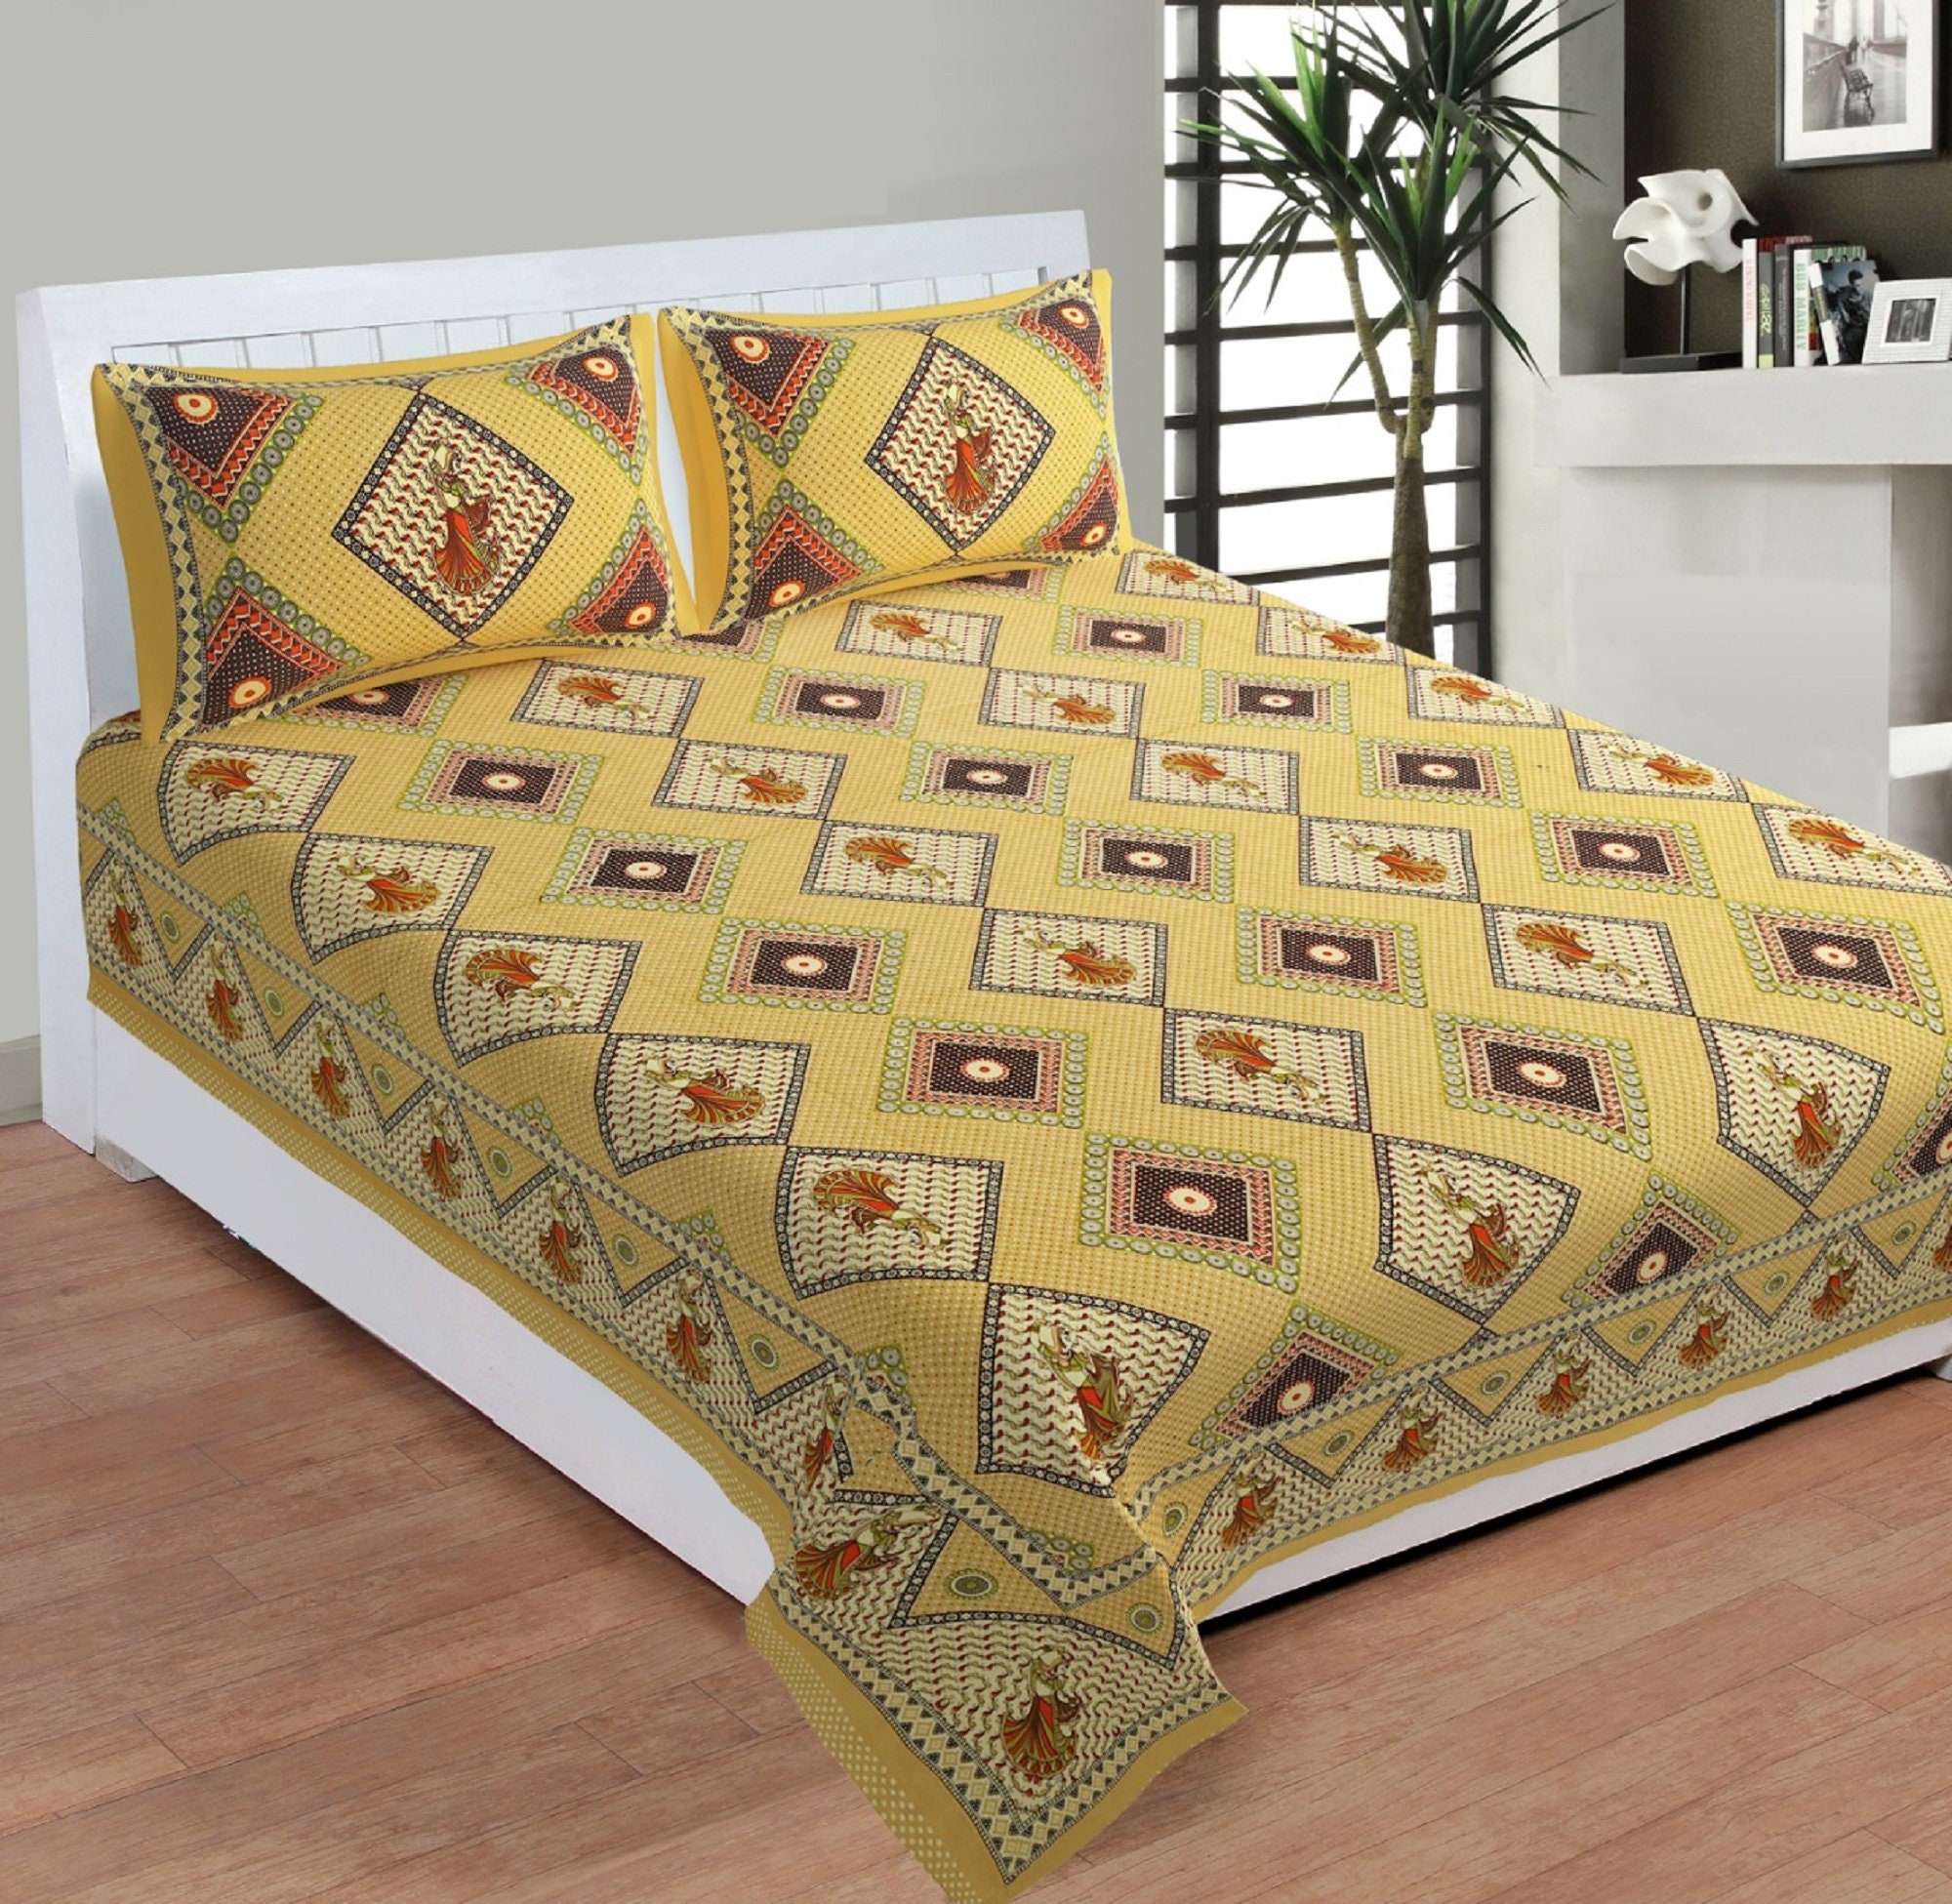 Handmade Indian Rajasthani King Size Pure Cotton Bed Sheet Two Pillow Covers Set 